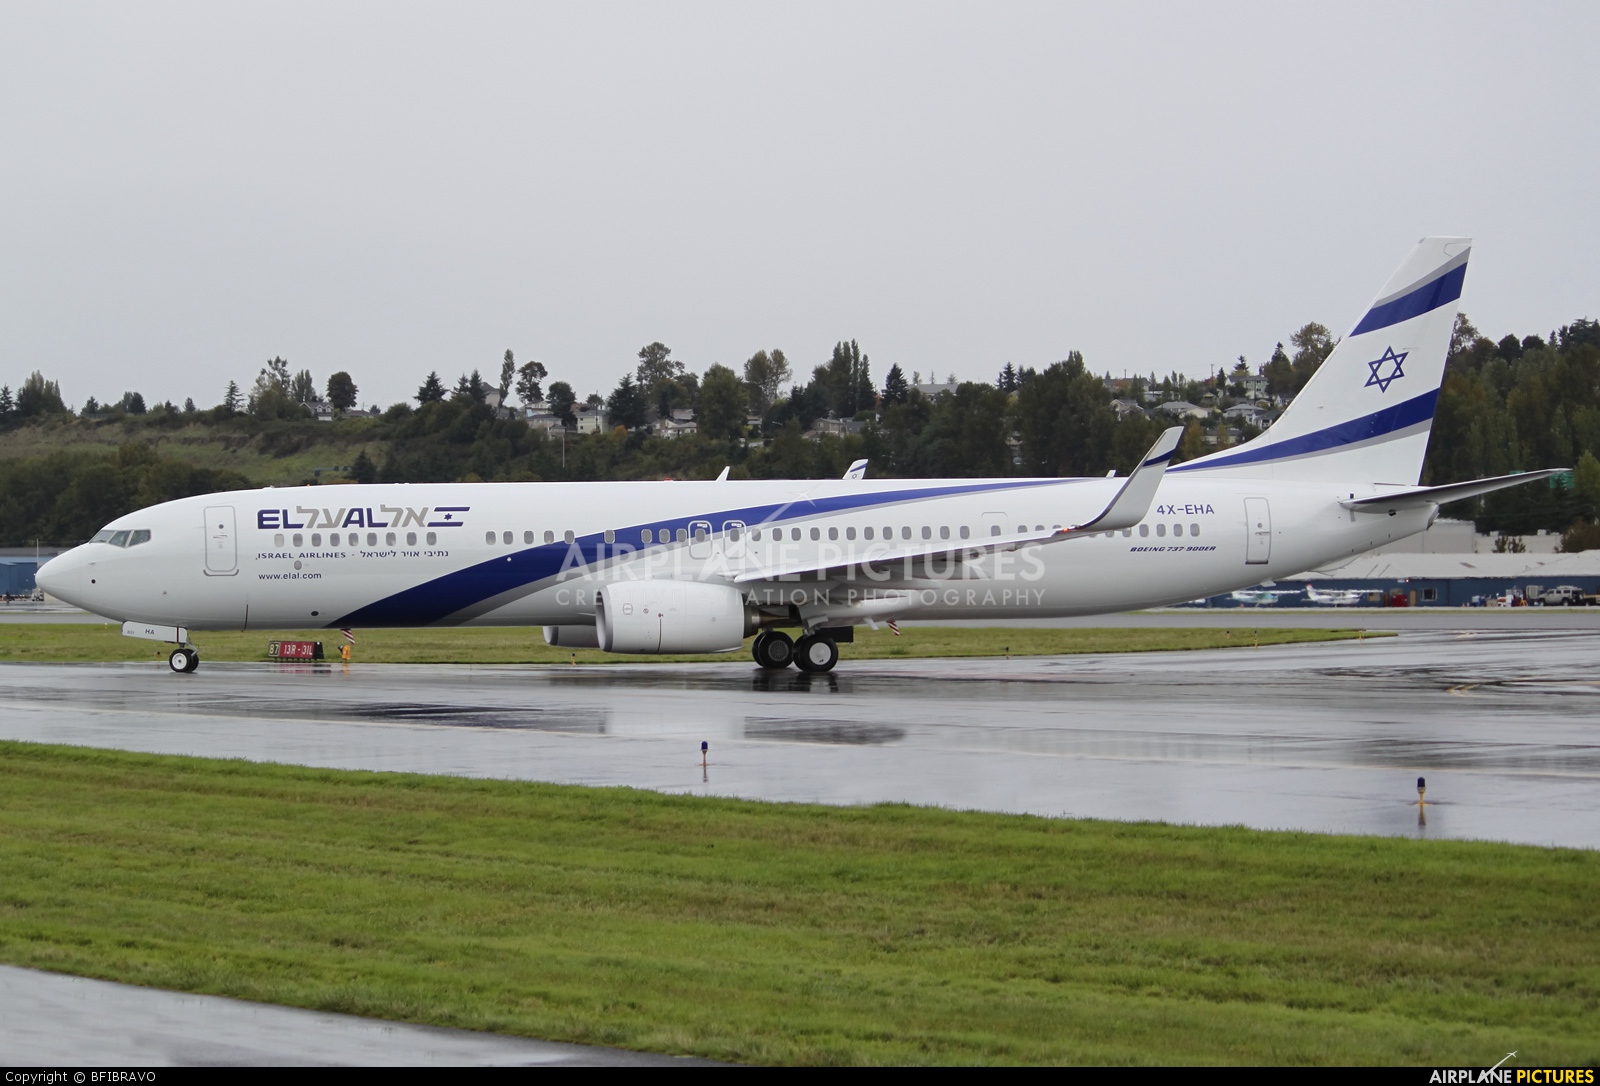 El Al Israel Airlines 4X-EHA aircraft at Seattle - Boeing Field / King County Intl